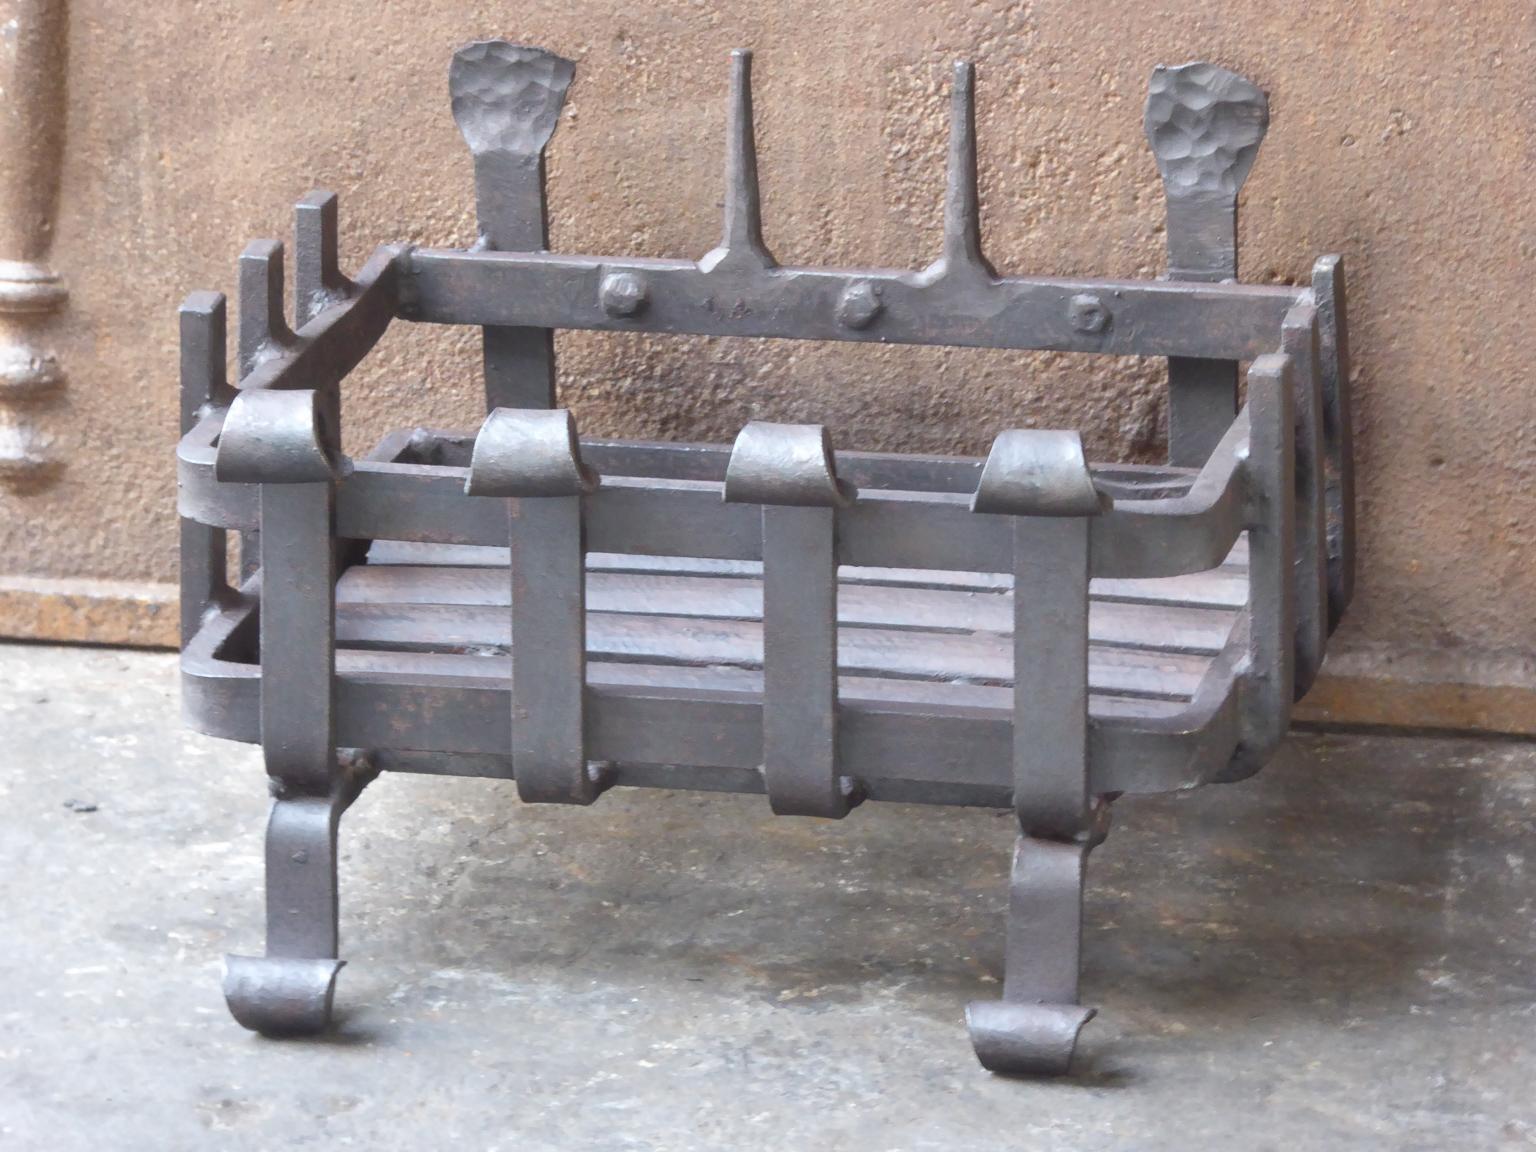 English modernist fireplace basket or fire basket. The fireplace grate is made of wrought iron.

We have a unique and specialized collection of antique and used fireplace accessories consisting of more than 1000 listings at 1stdibs. Amongst others